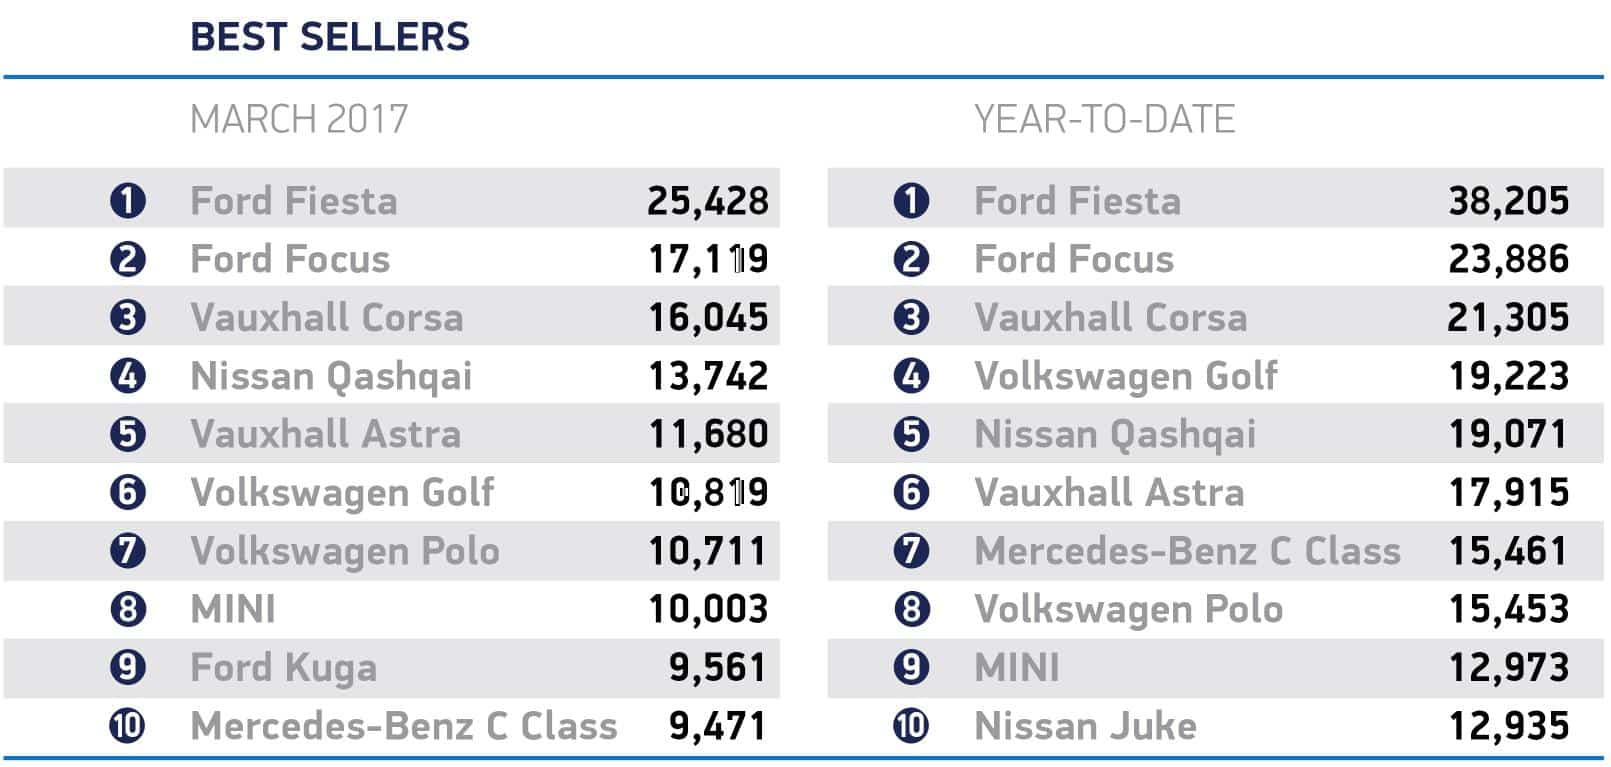 saw new car sales soar to all-time records,